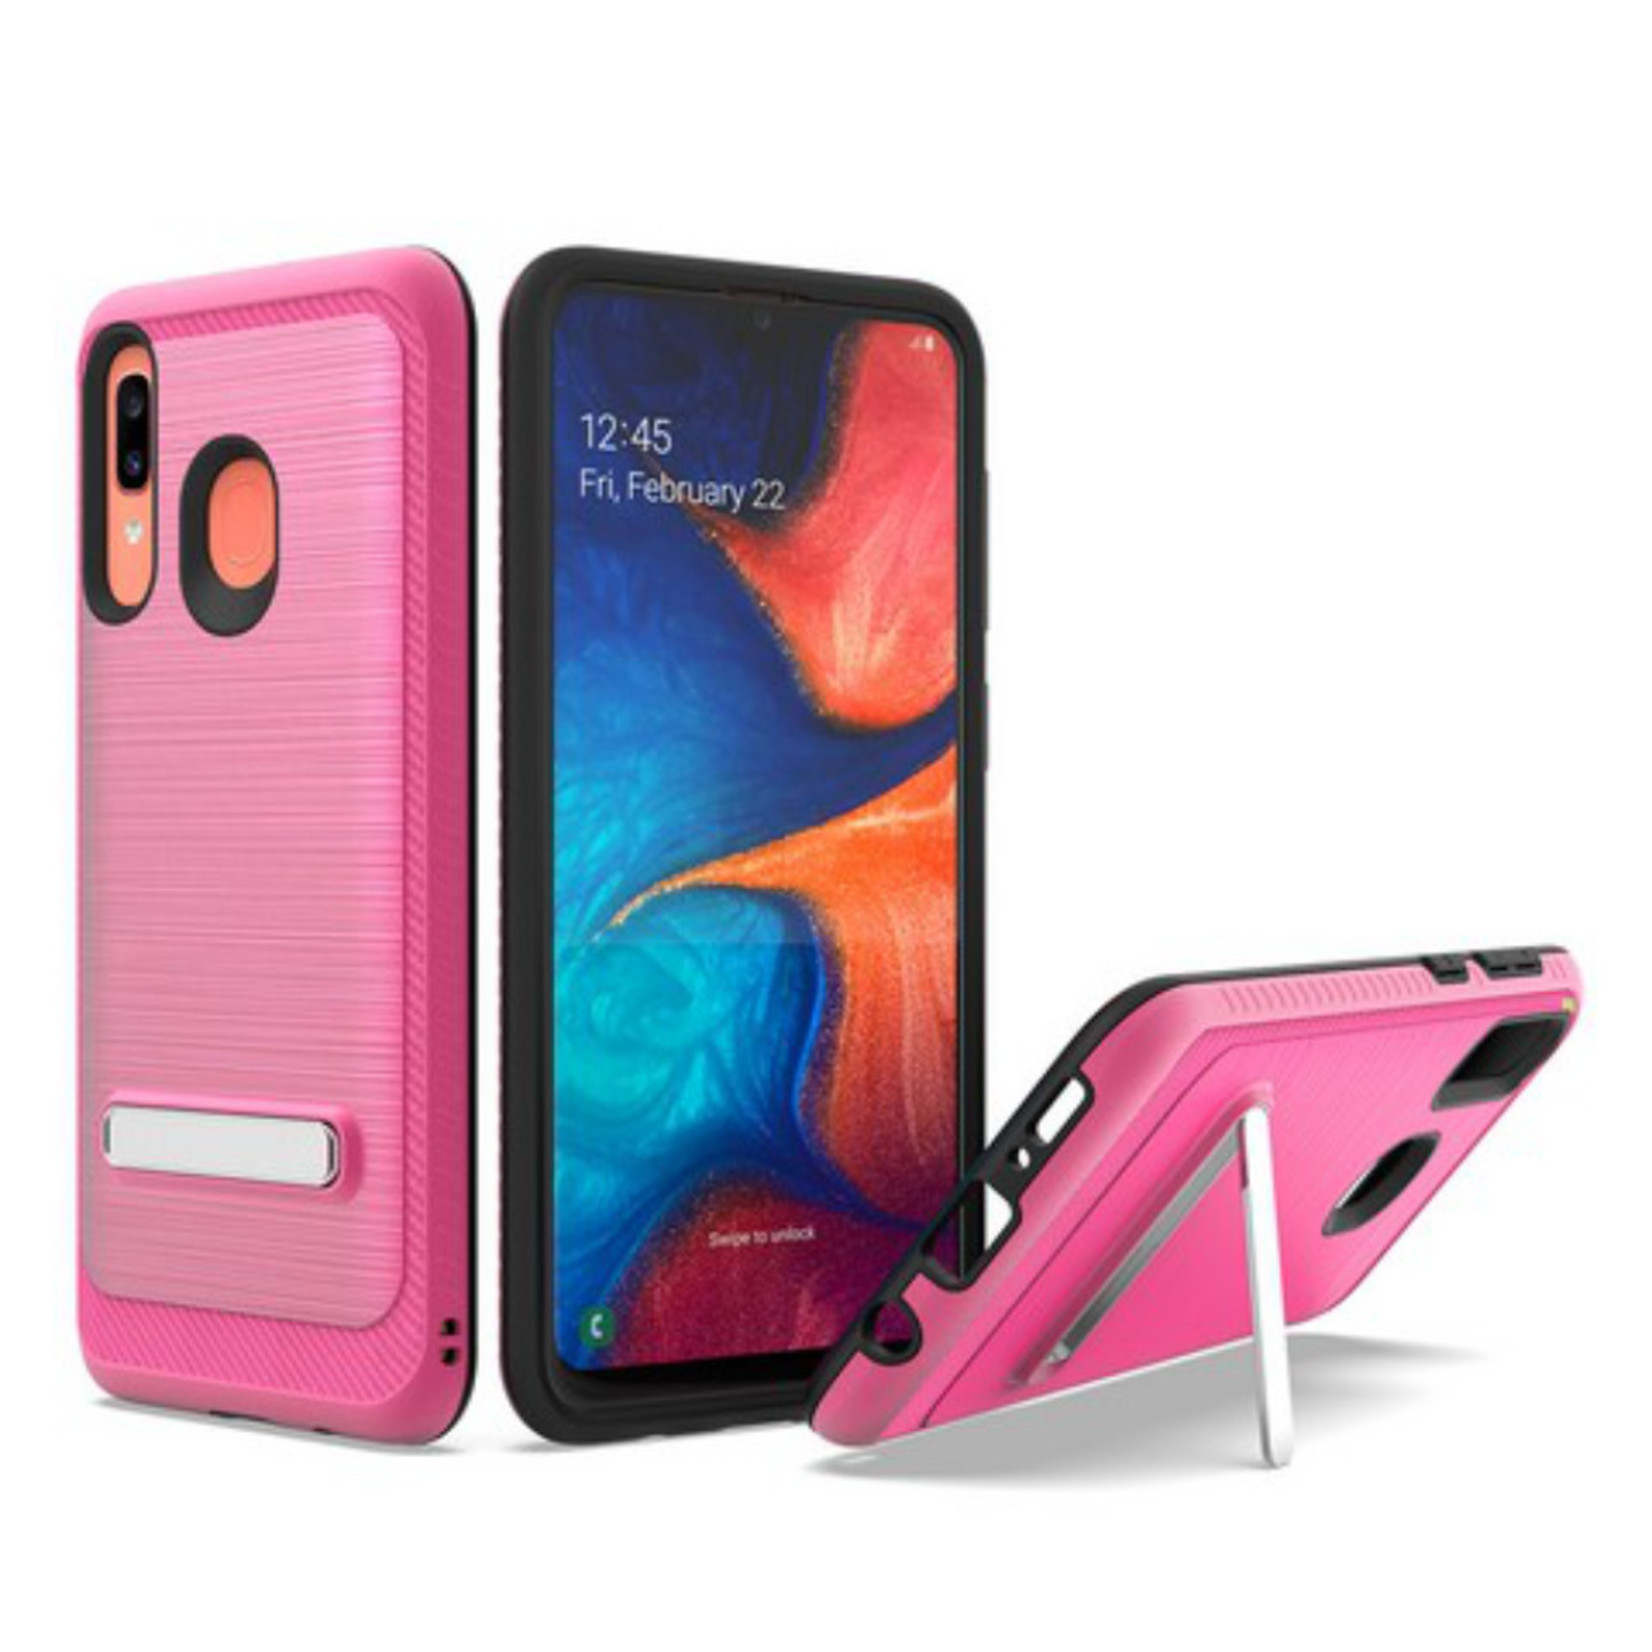 Metallic PC TPU Brushed Case Carbon Fiber Edge with Kickstand for Galaxy A20